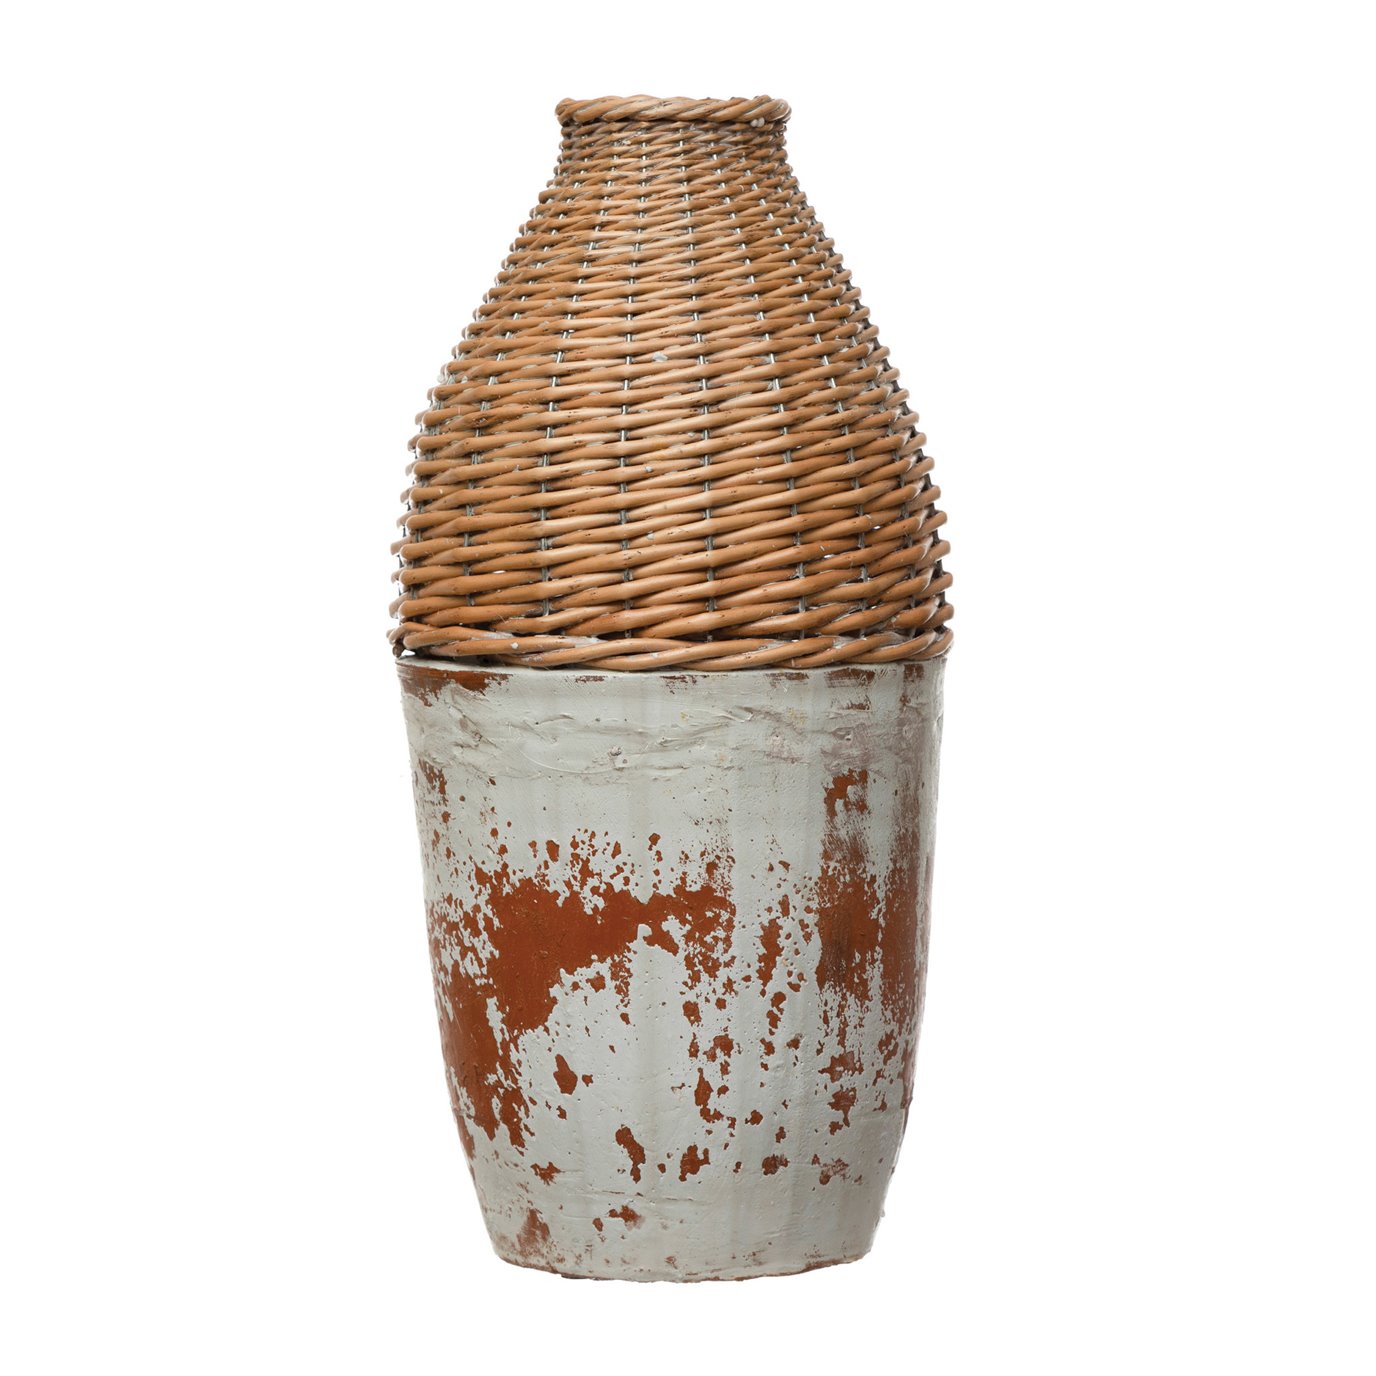 Hand-Woven Rattan & Clay Vase, Distressed White (Each One Will Vary)